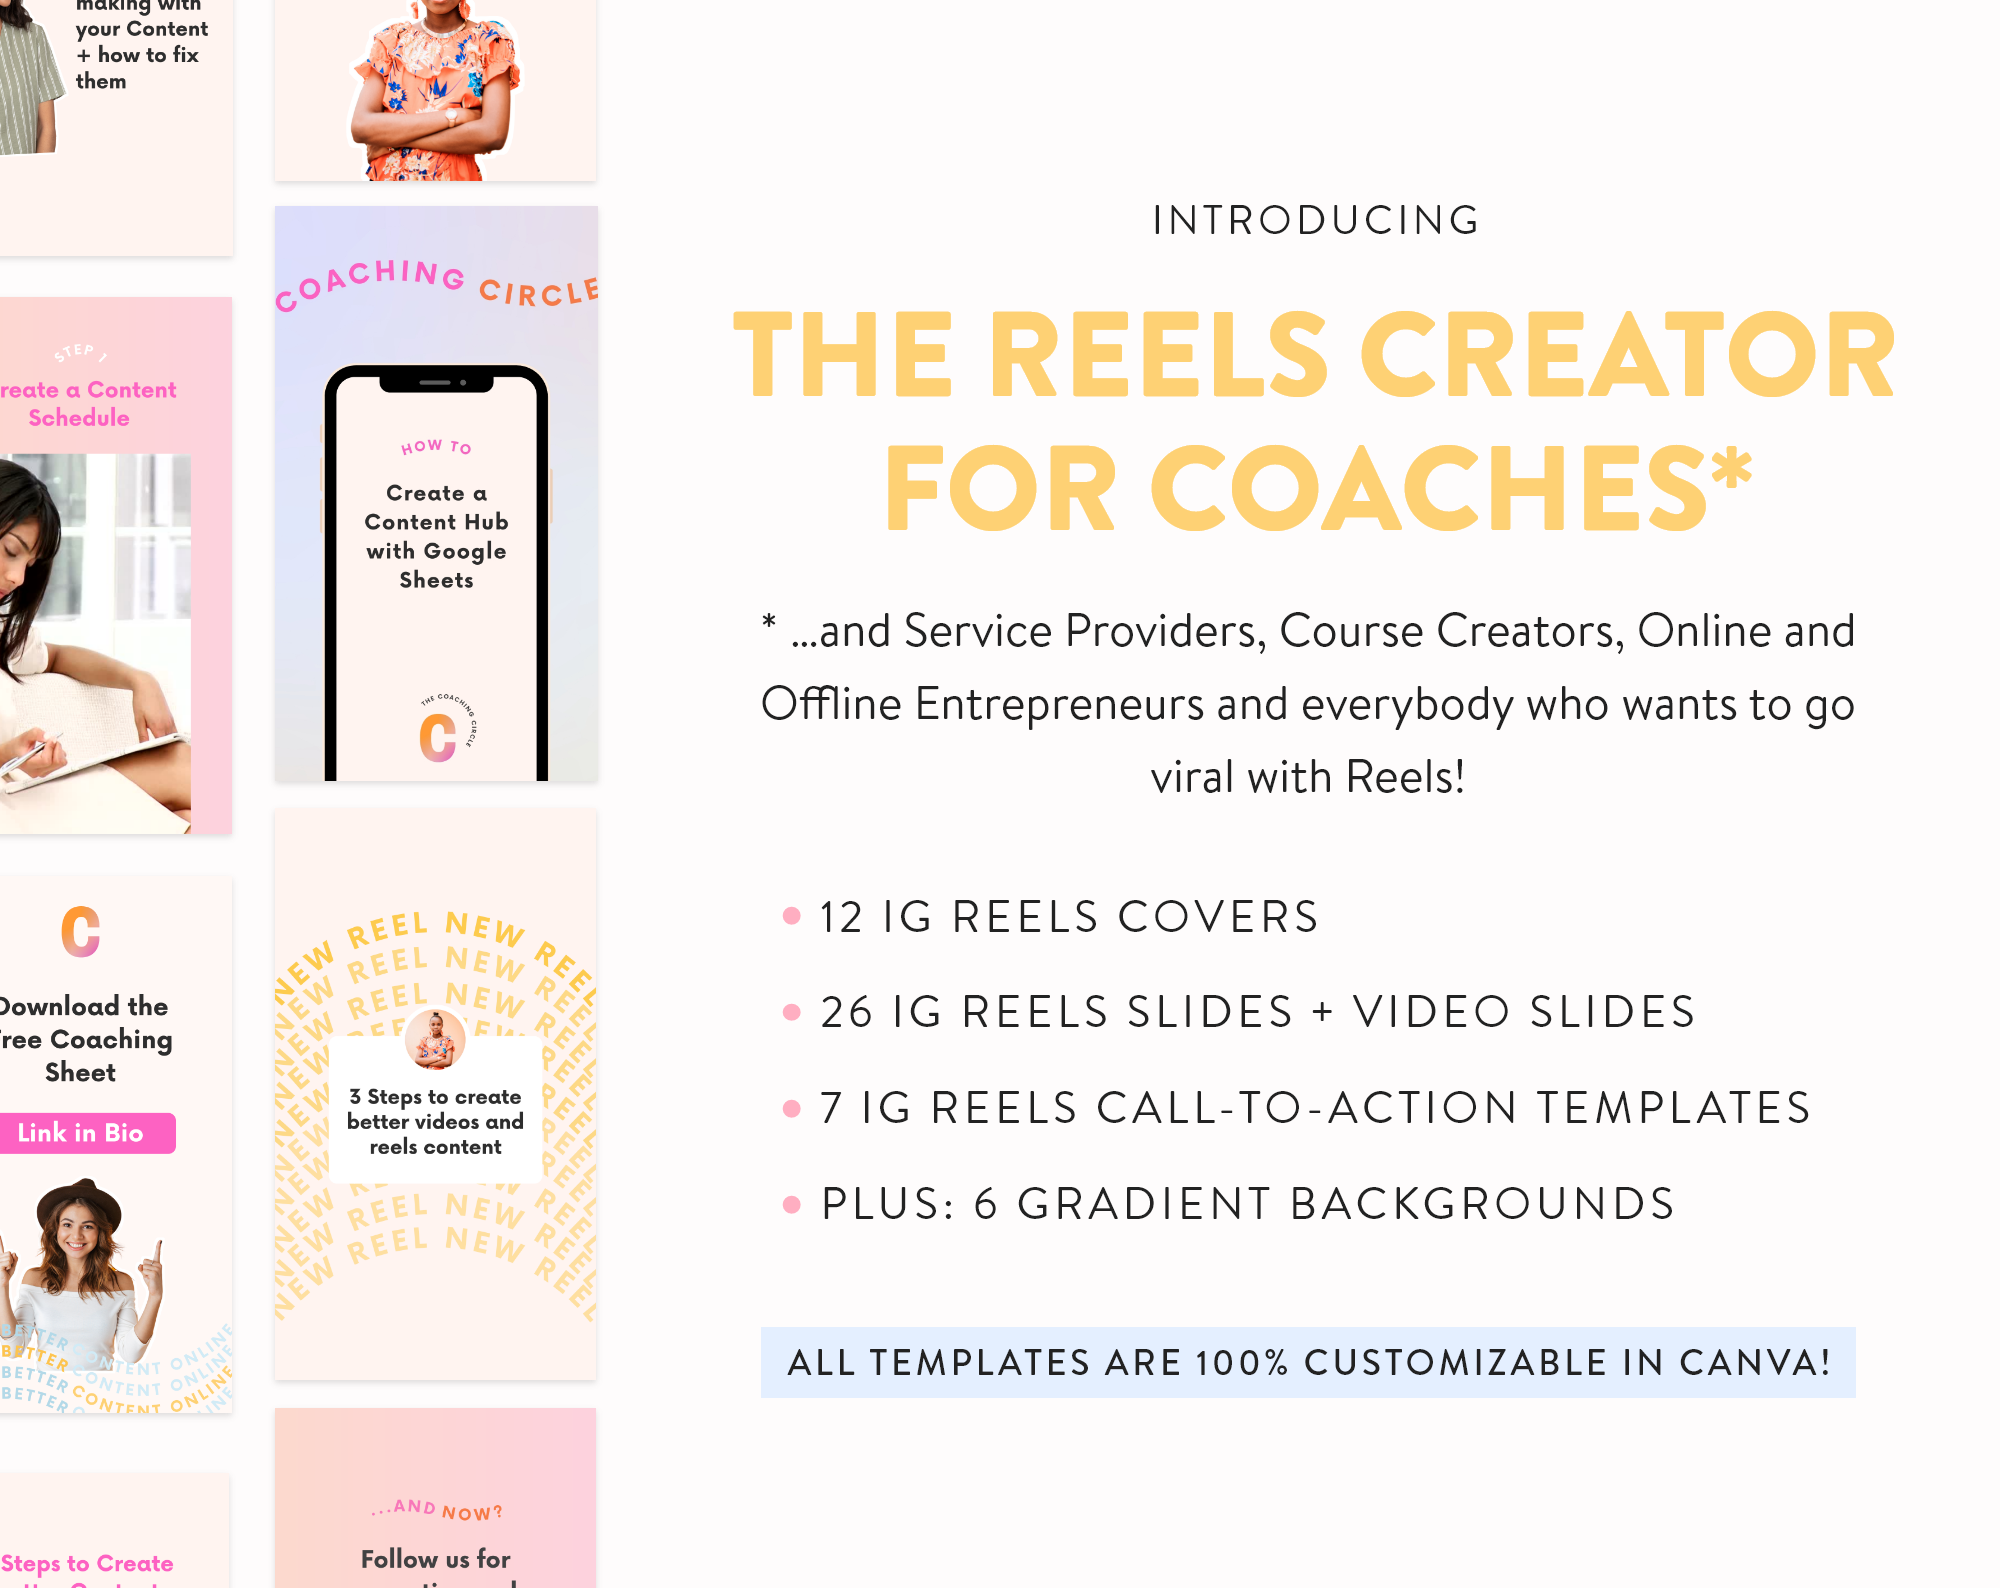 Coach-instagram-reels-templates-for-canva-intro-1